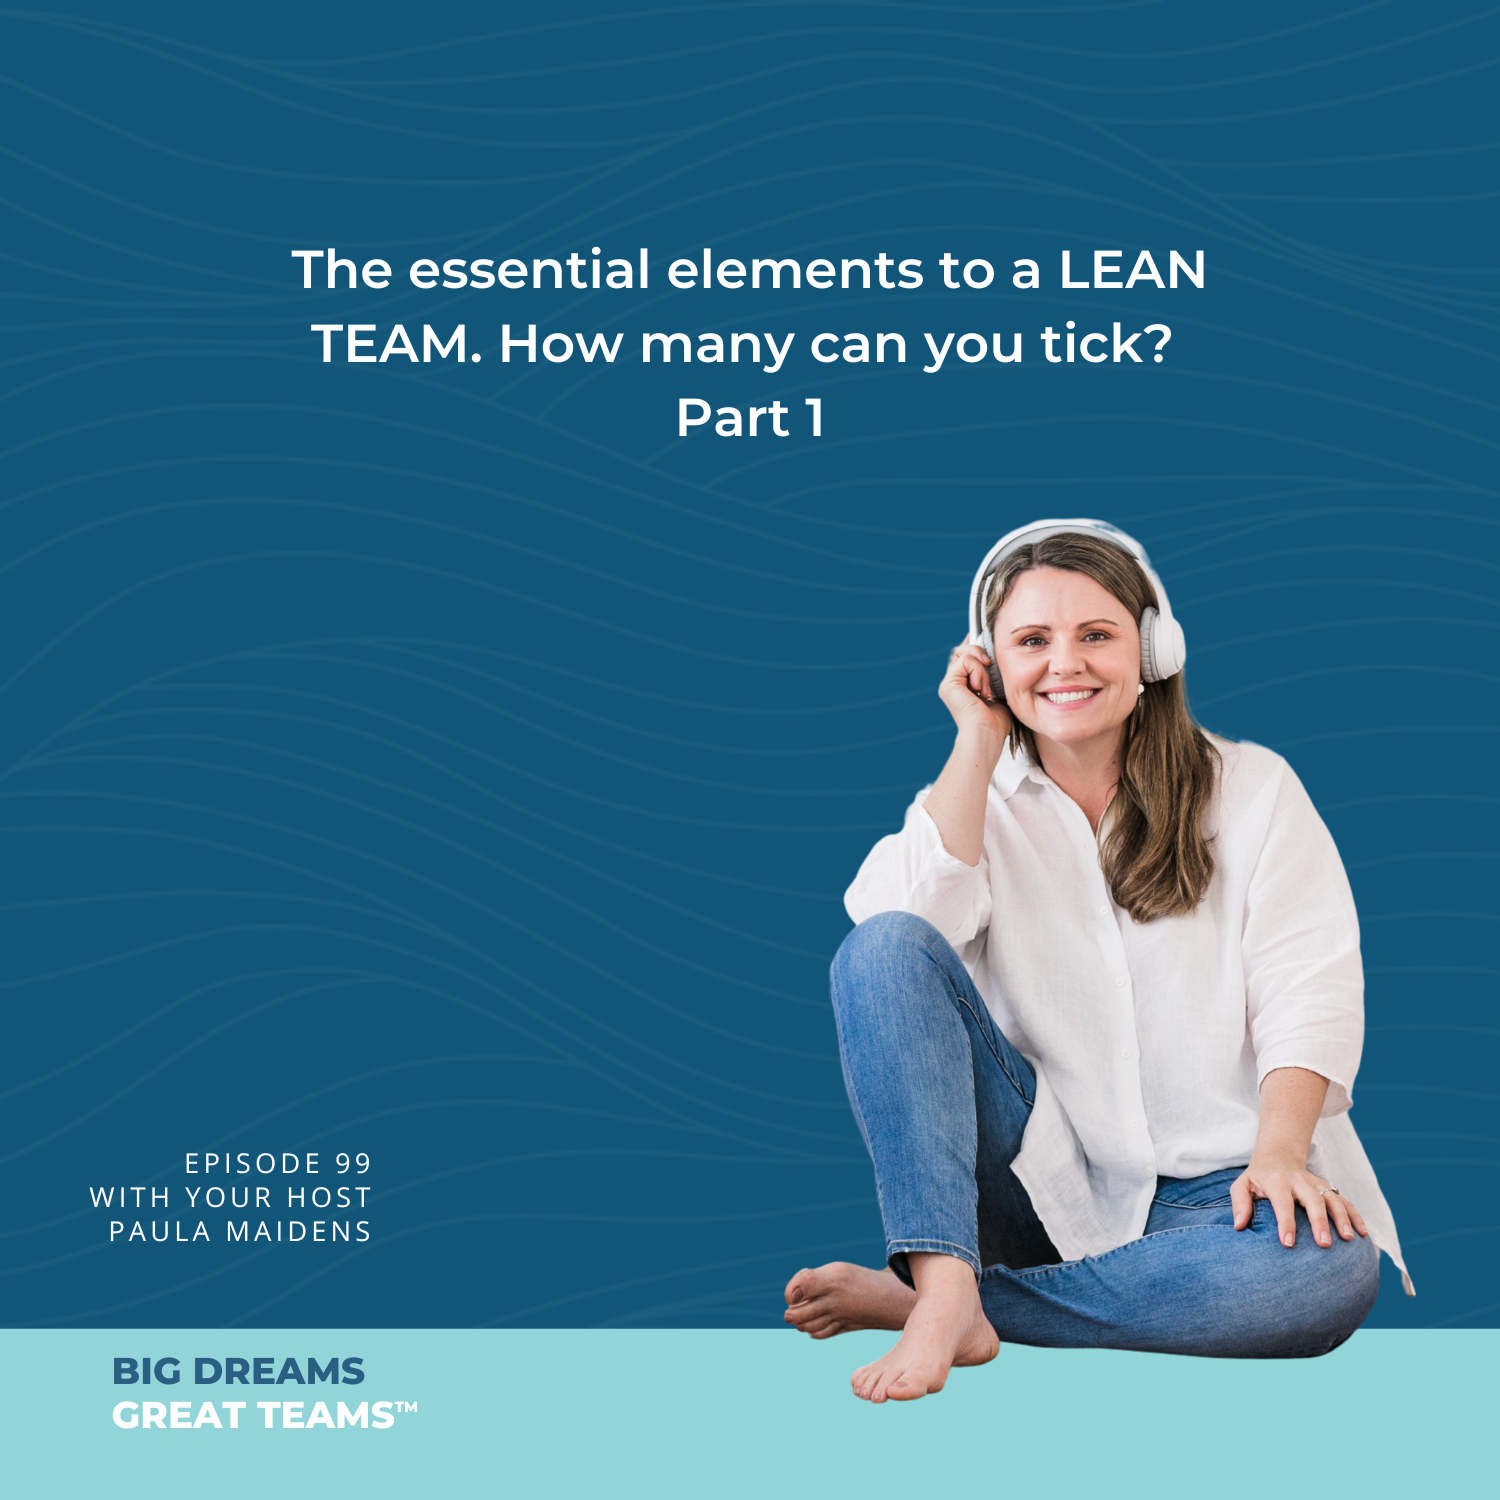 Episode #99 - The essential elements to a LEAN TEAM. How many can you tick? Part 1